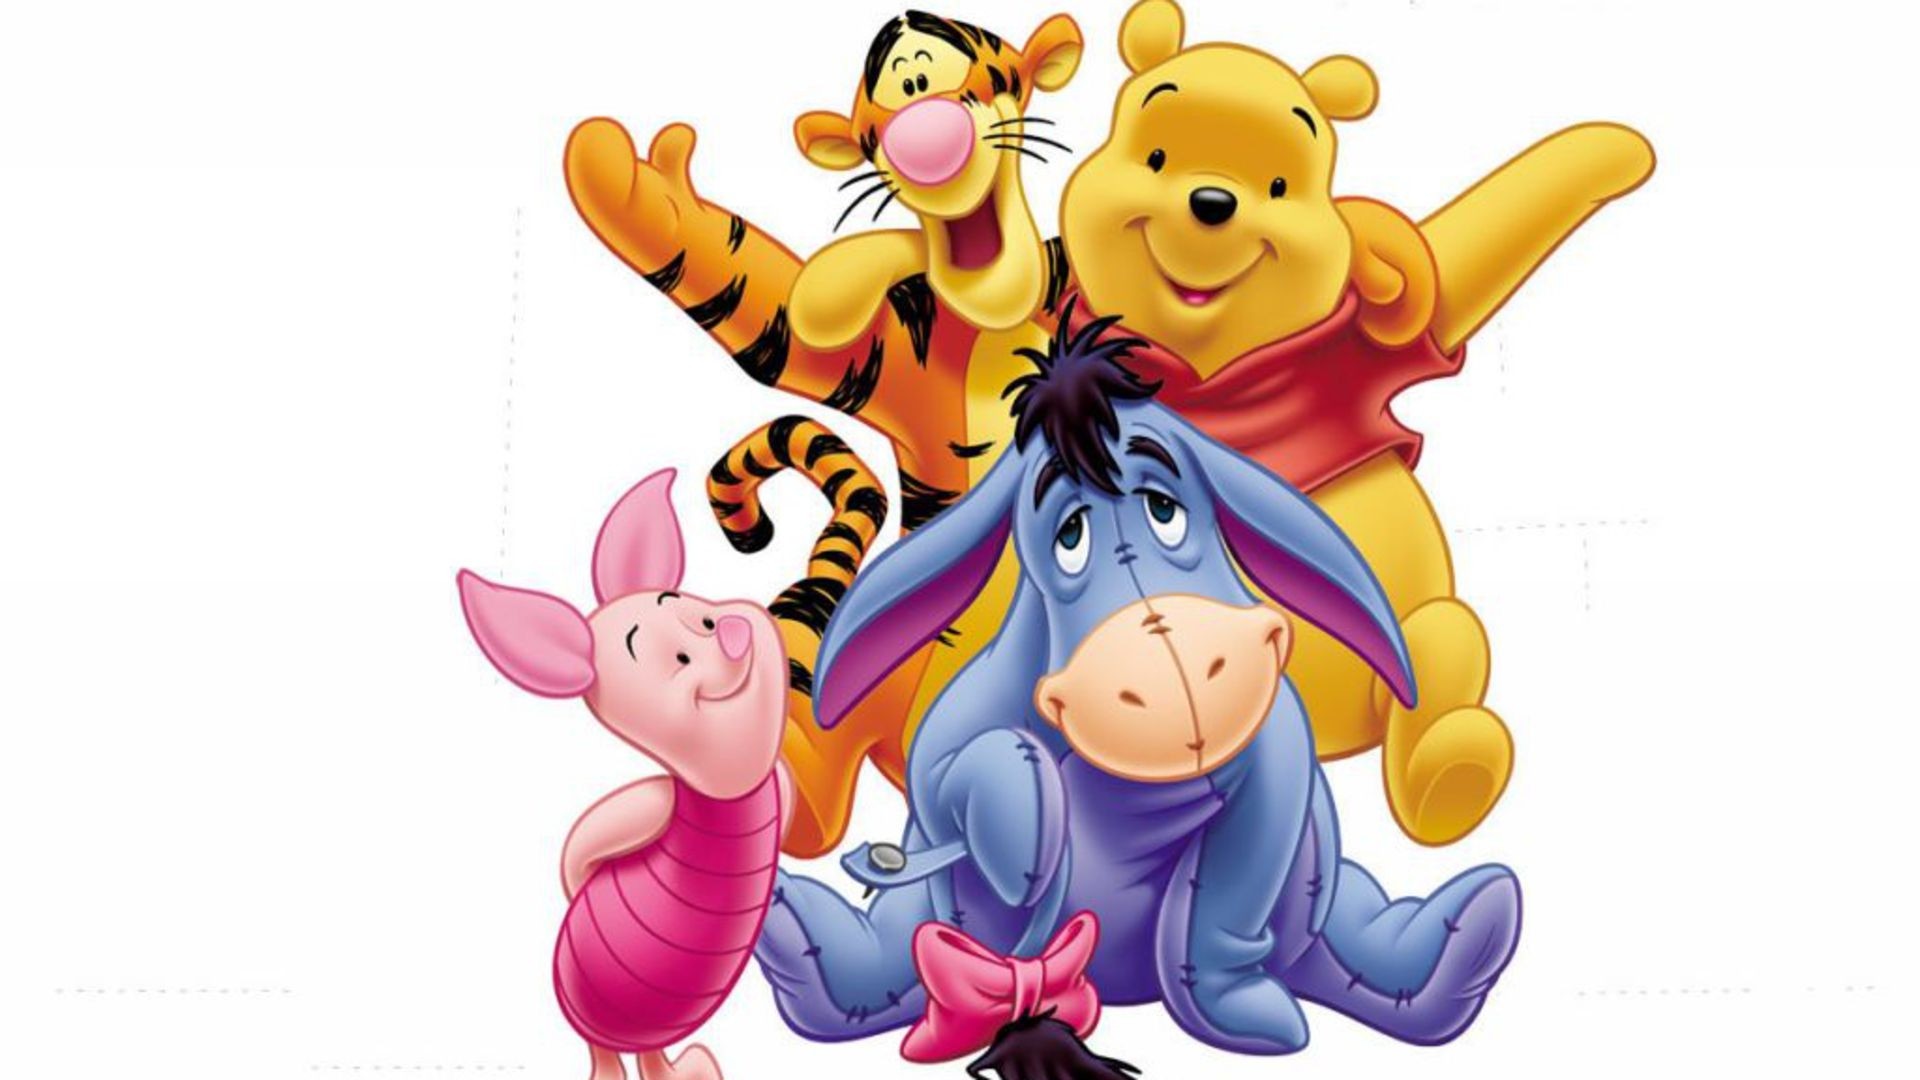 1920x1080 Related Wallpapers from Disney Screensavers. Free Winnie The Pooh Wallpaper